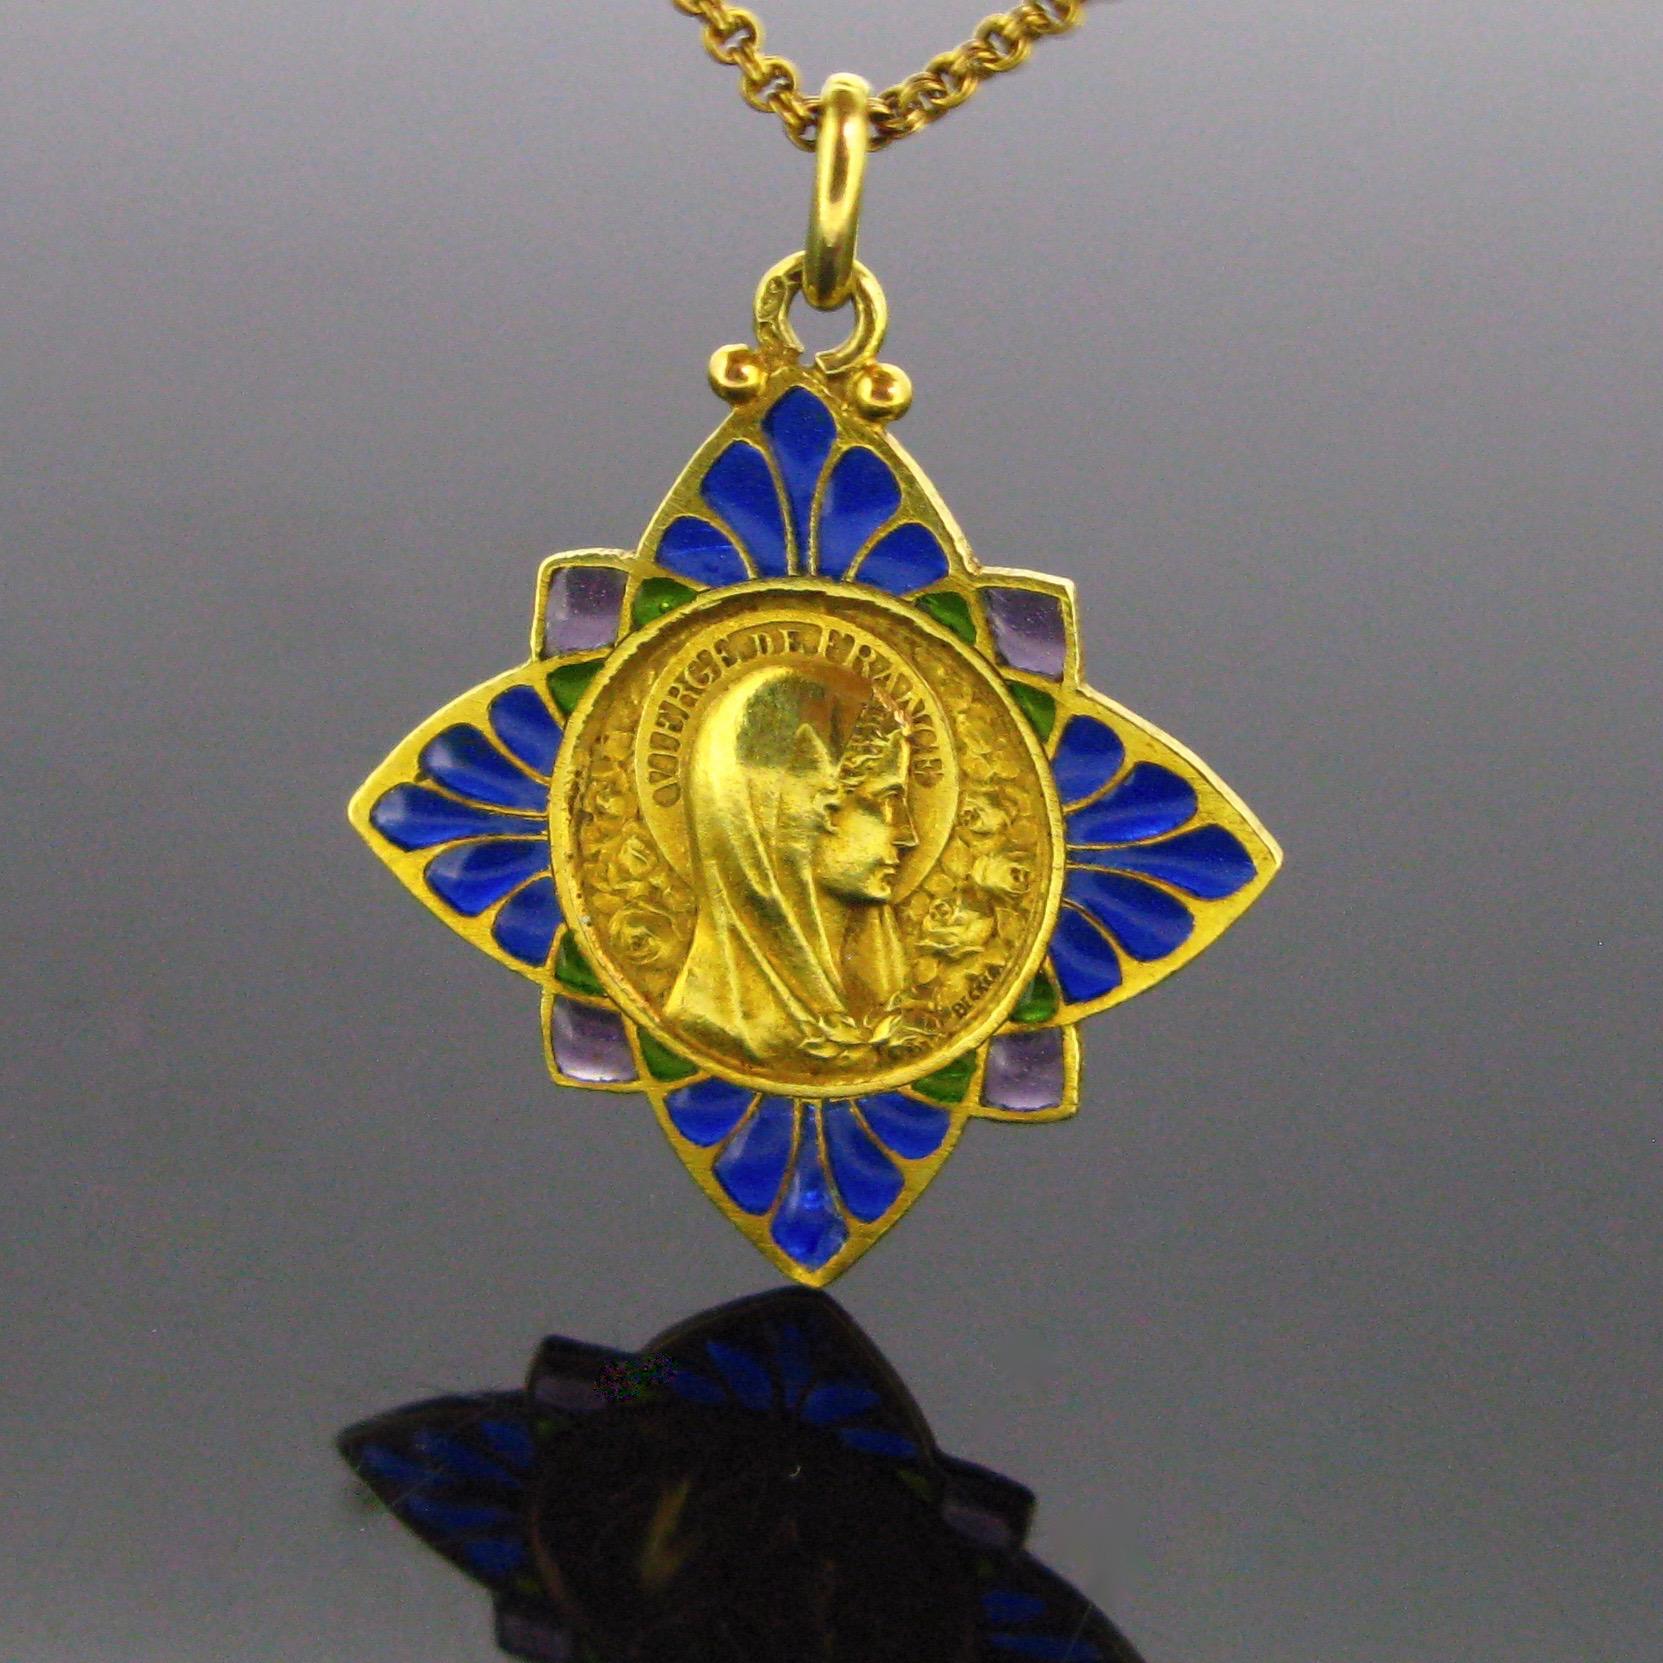 This beautiful medal from the Art Nouveau period is made in 18kt yellow gold and with navy blue, green and purple enamel, with the plique a jour technique. It features the profile the Virgin Mary saint to the right. She is surrounded with roses and